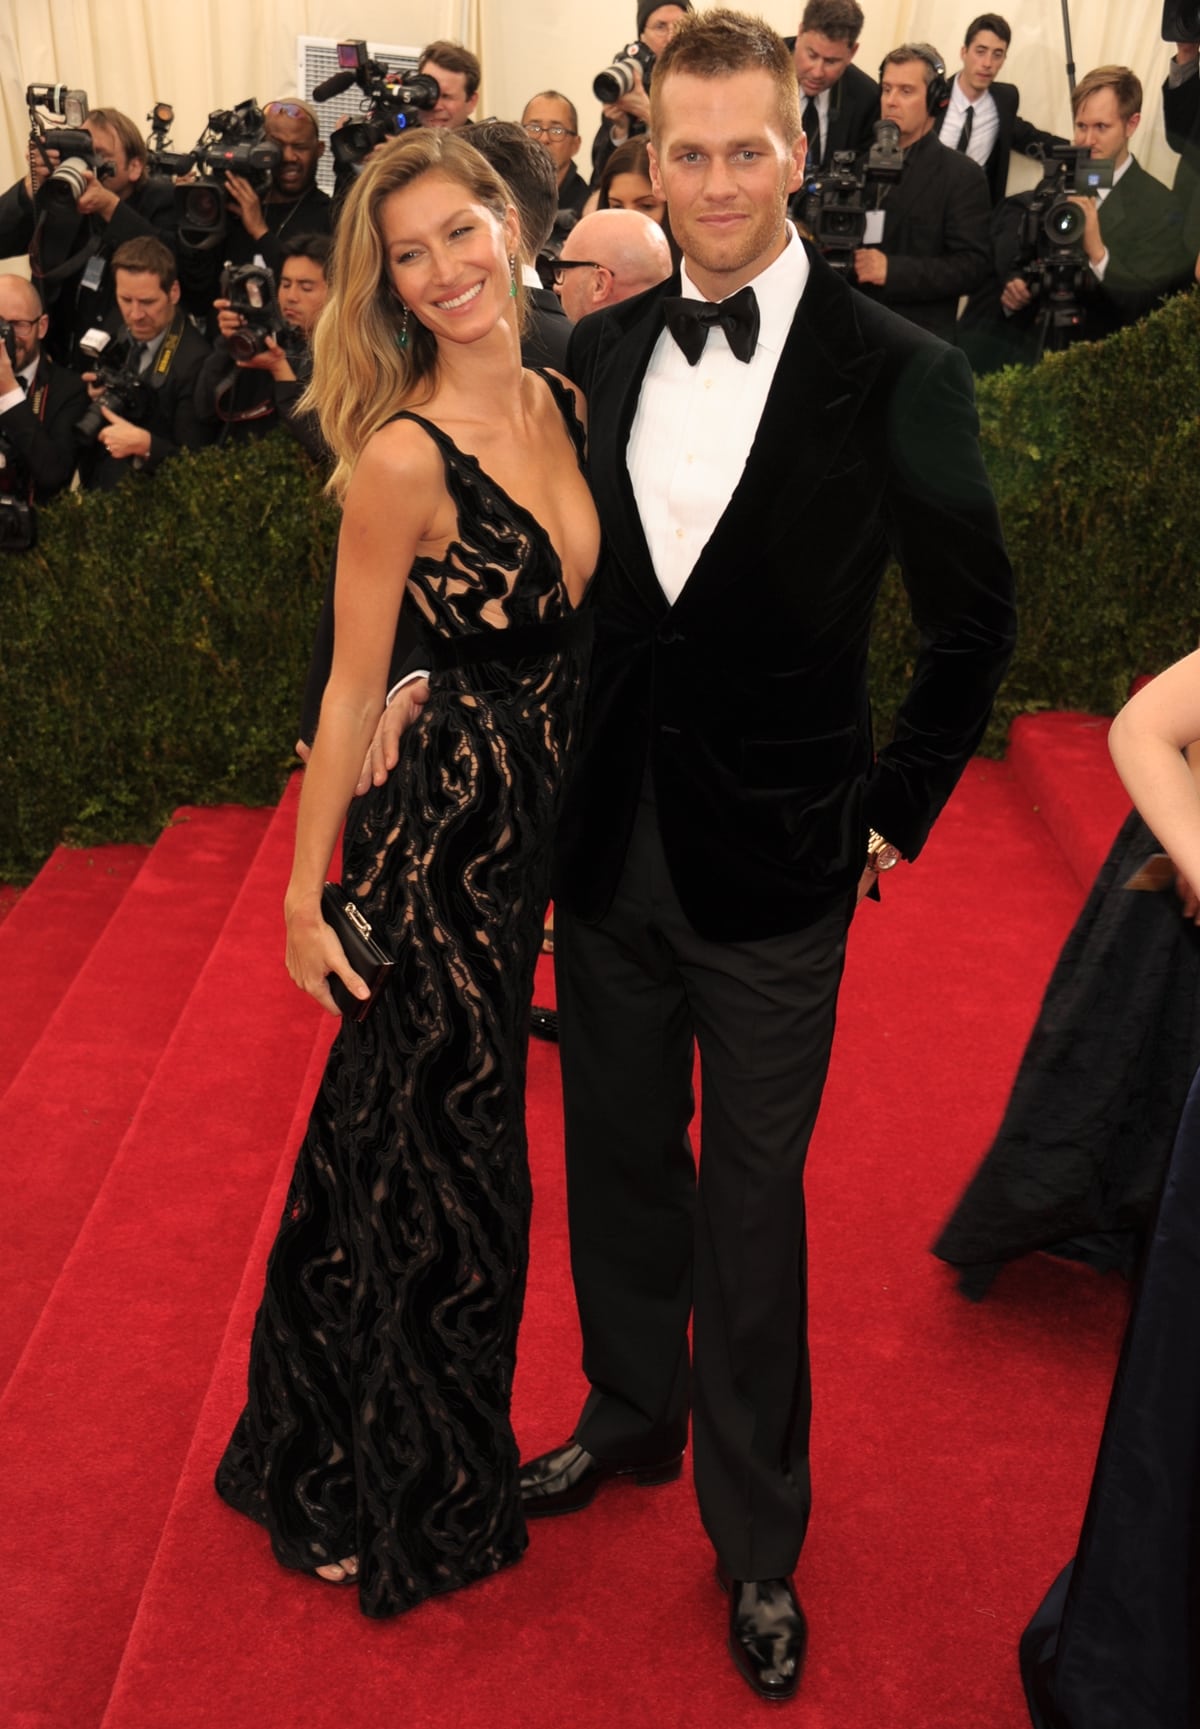 Gisele Bündchen in a plunging black velvet Balenciaga gown with Tom Brady at the 2014 Met Gala